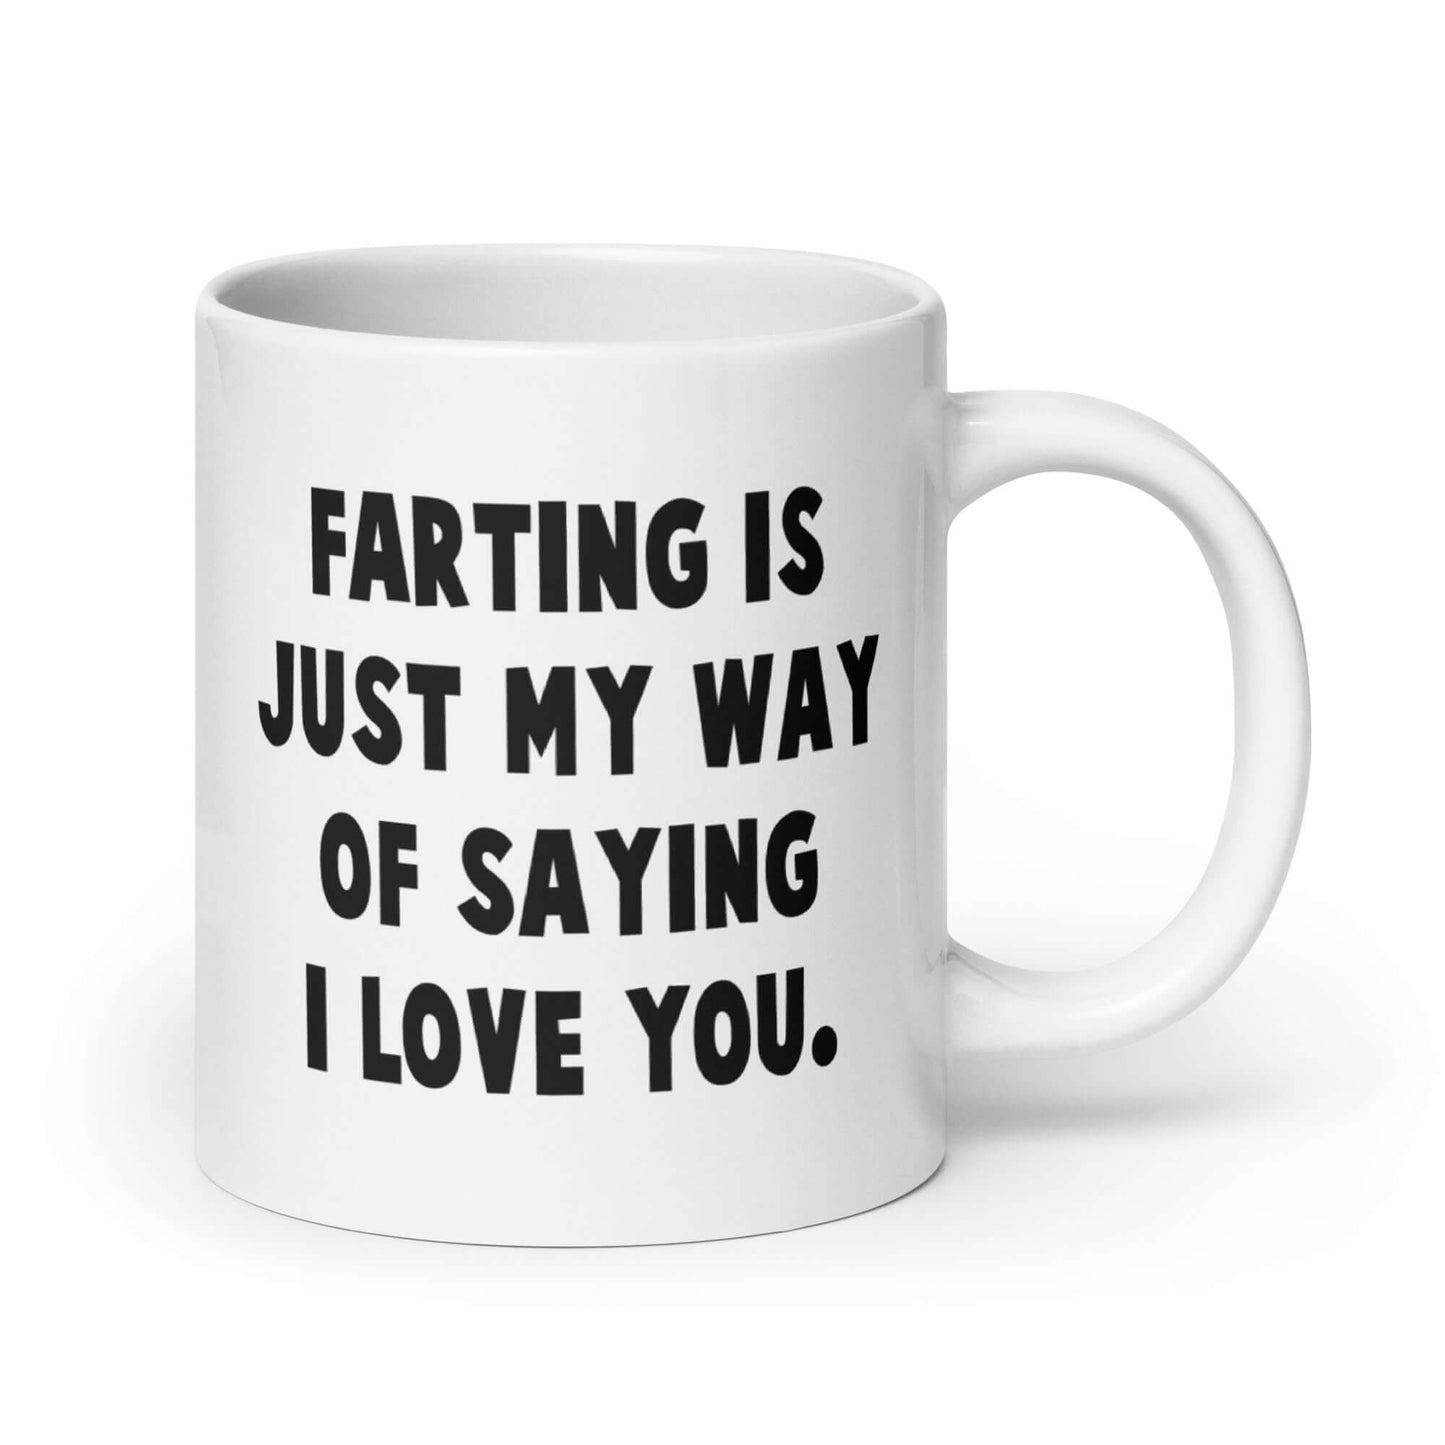 Farting is just my way of saying I love you funny coffee mug